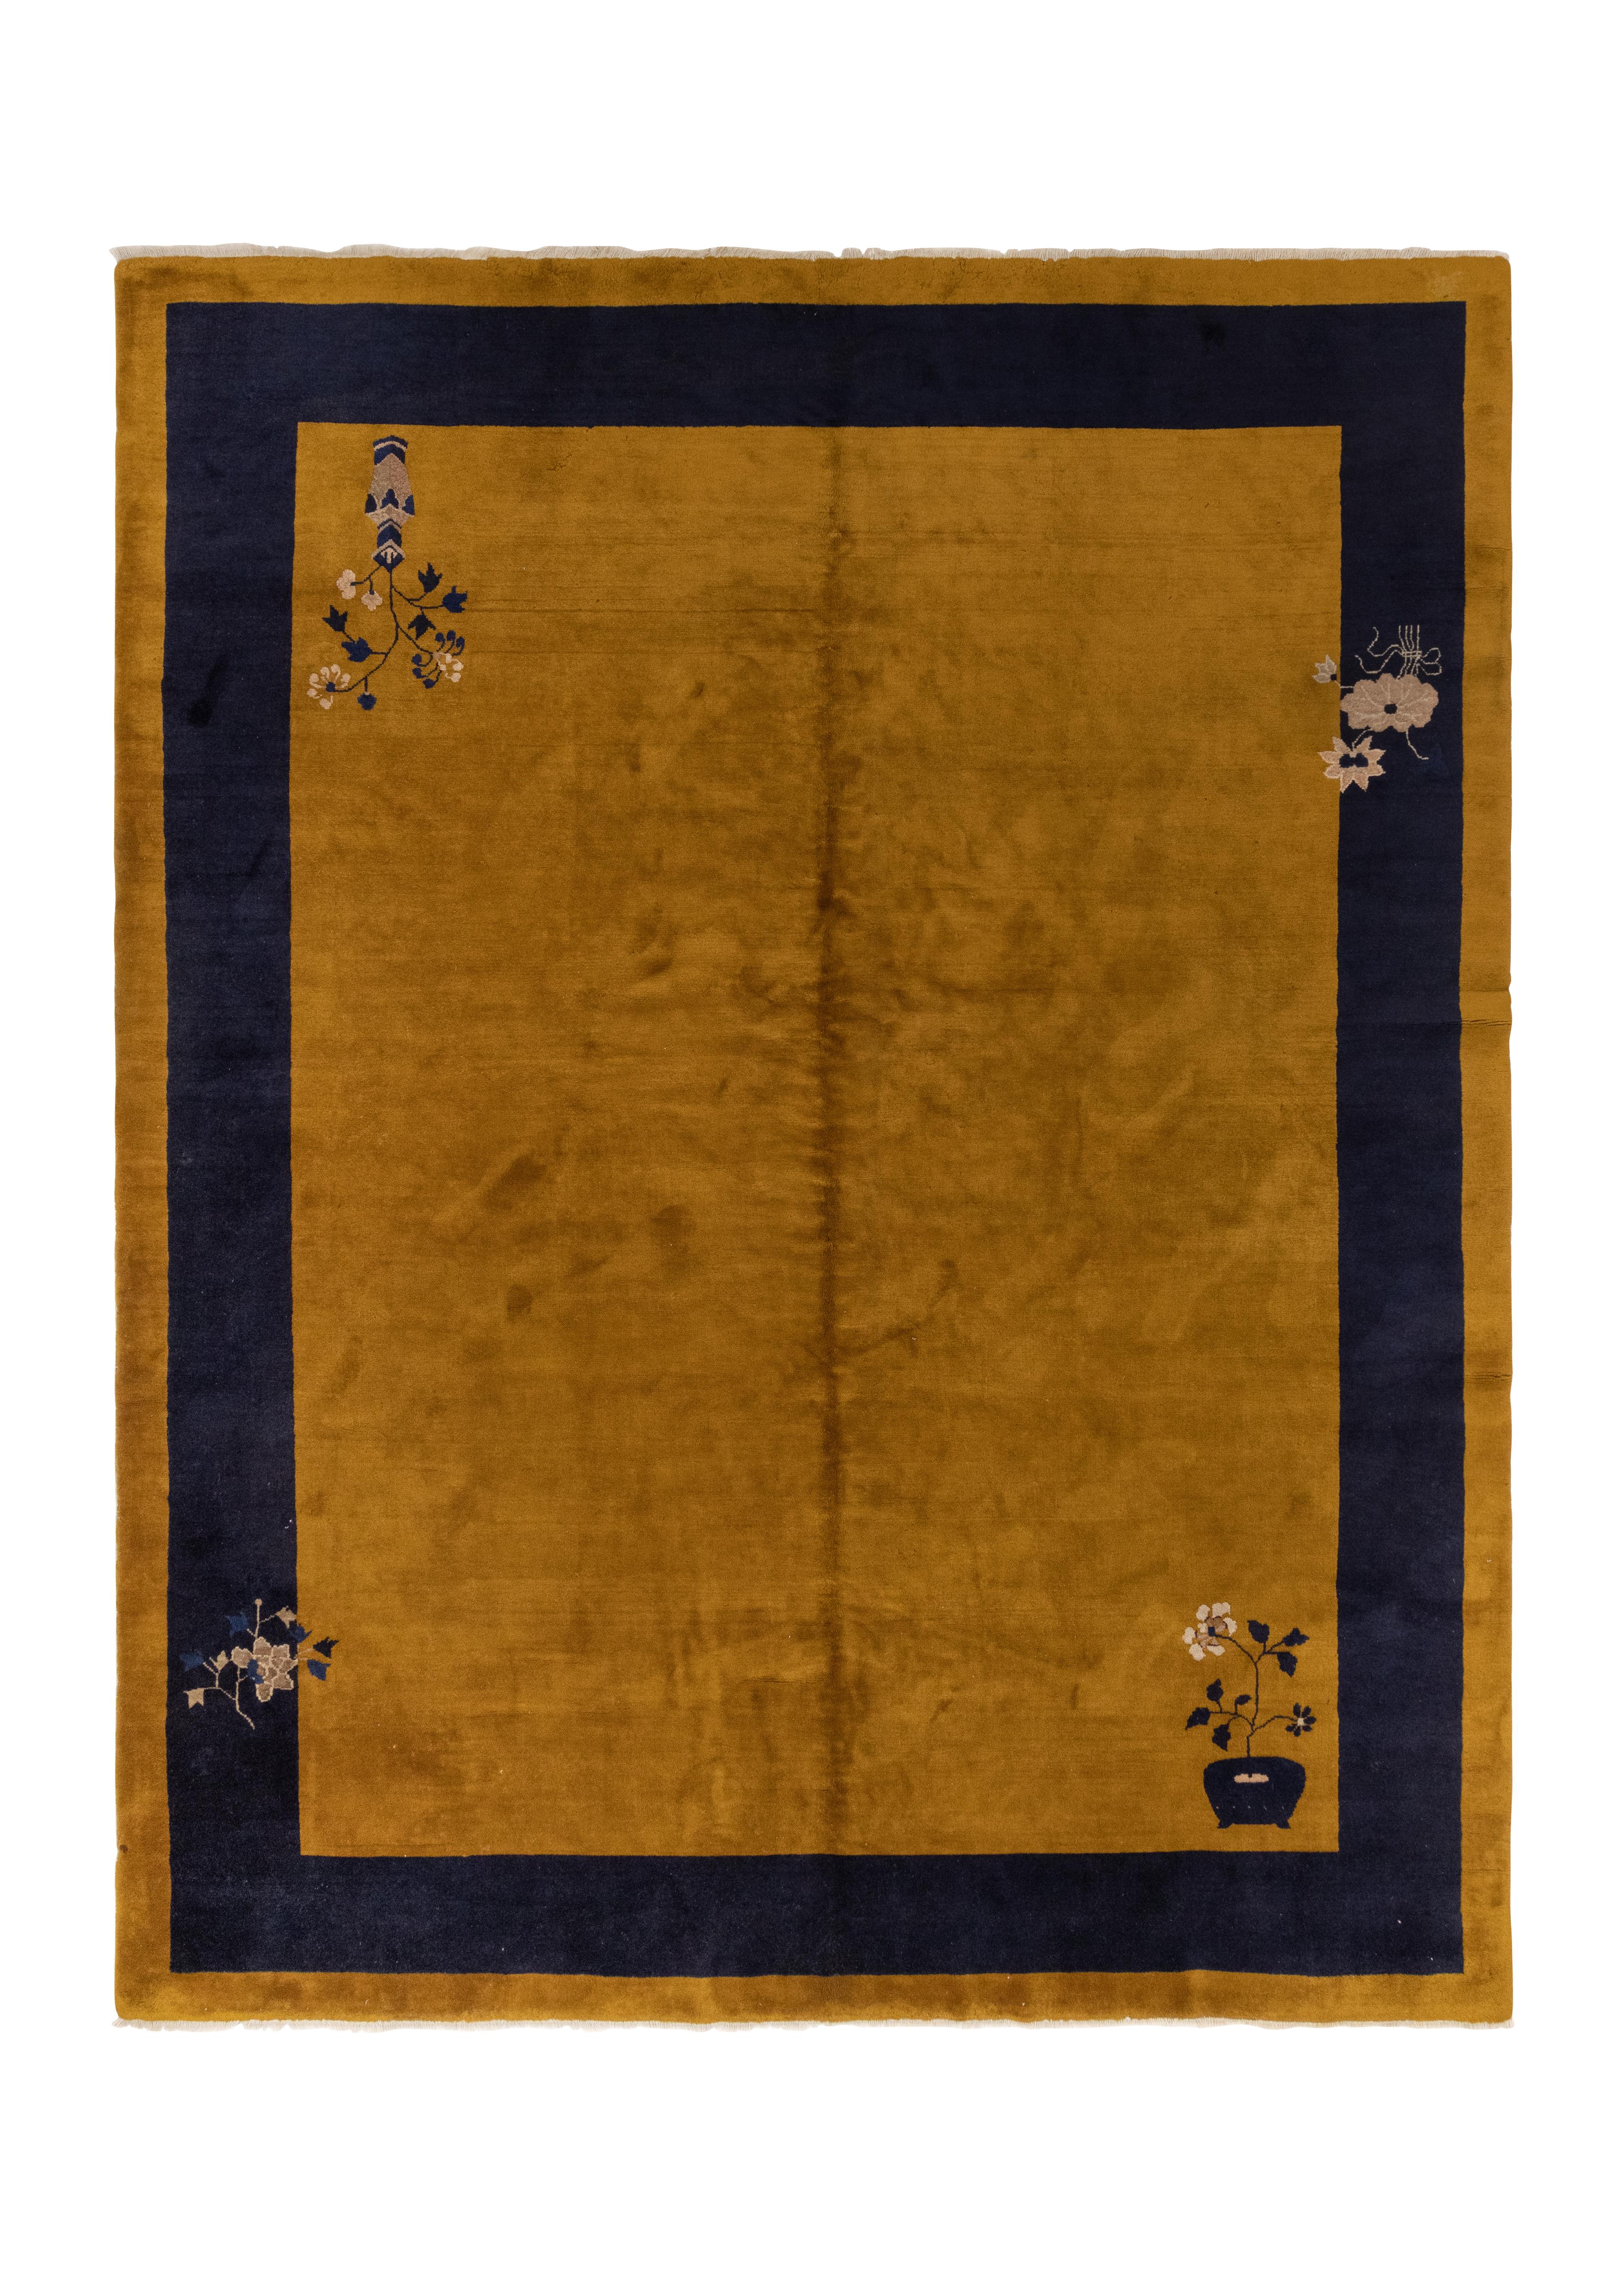 This is a Chinese Nickels Art Deco rug circa 1930s. This rug is woven with a beautiful soft wool giving it an extra shine and patina with a very simple simple pattern.